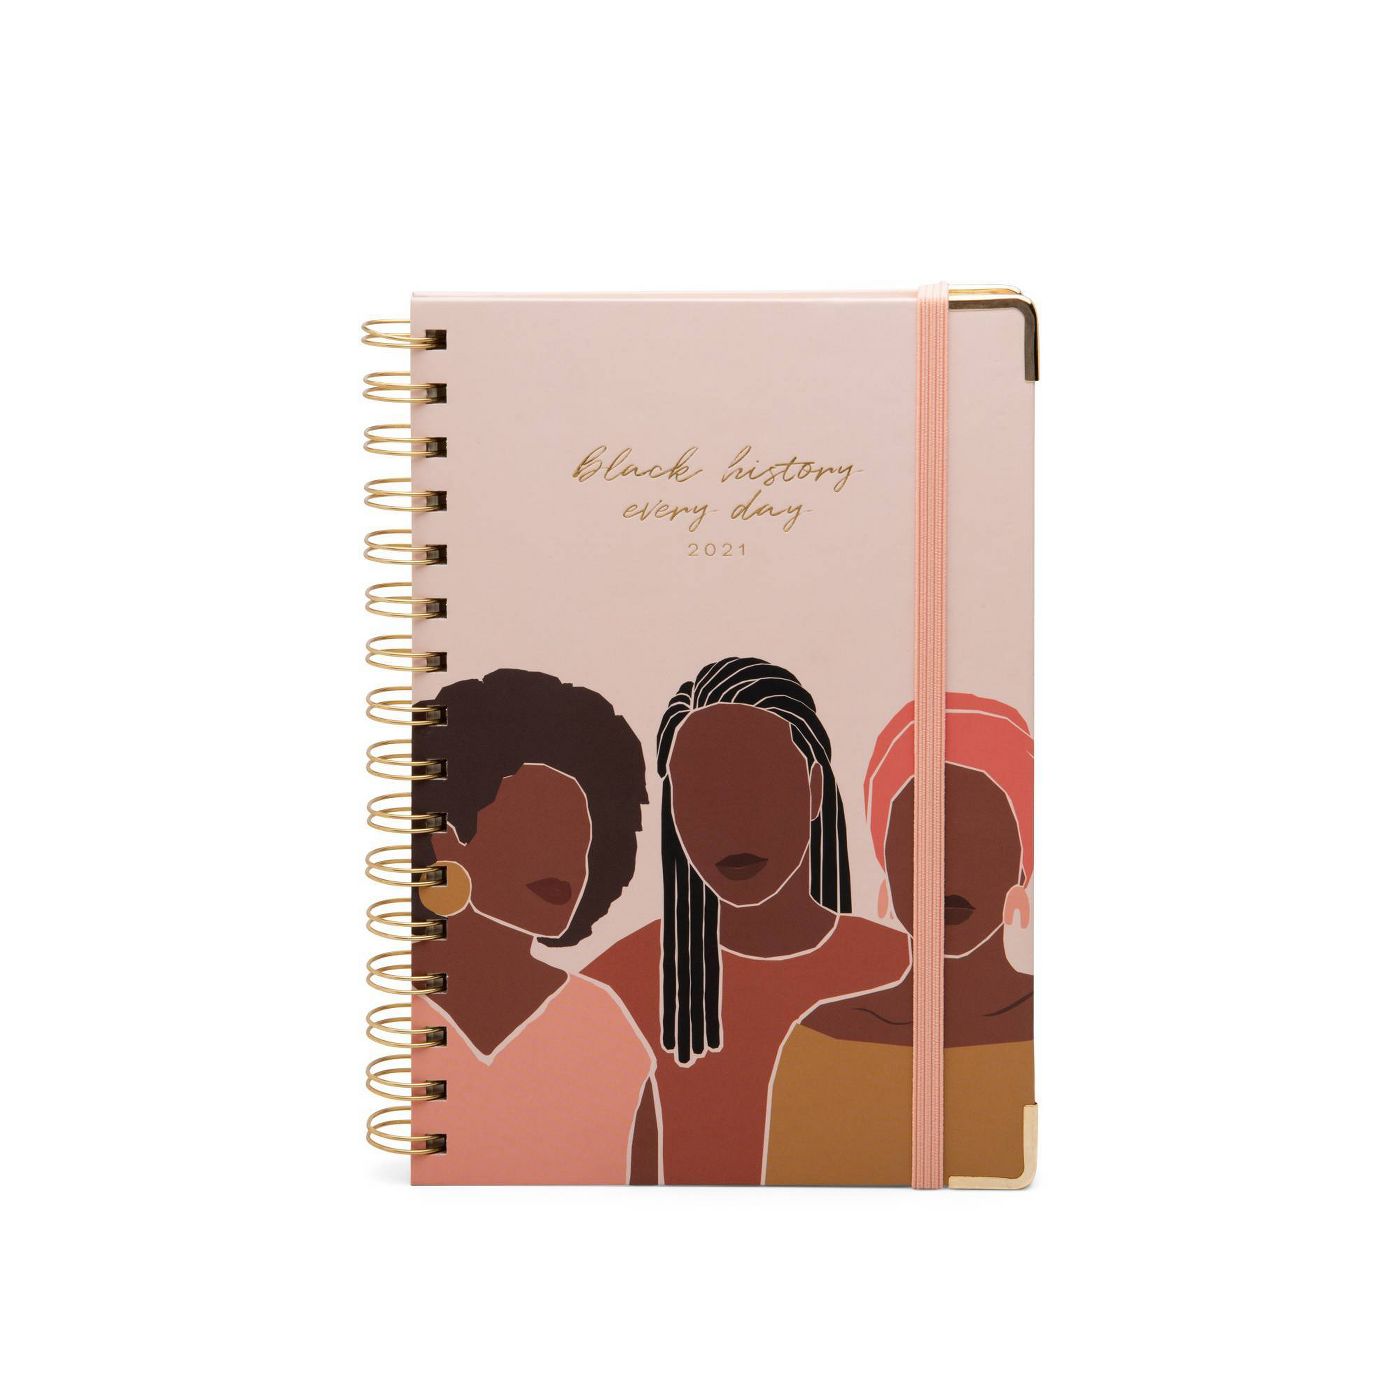 Black History Every Day Journal